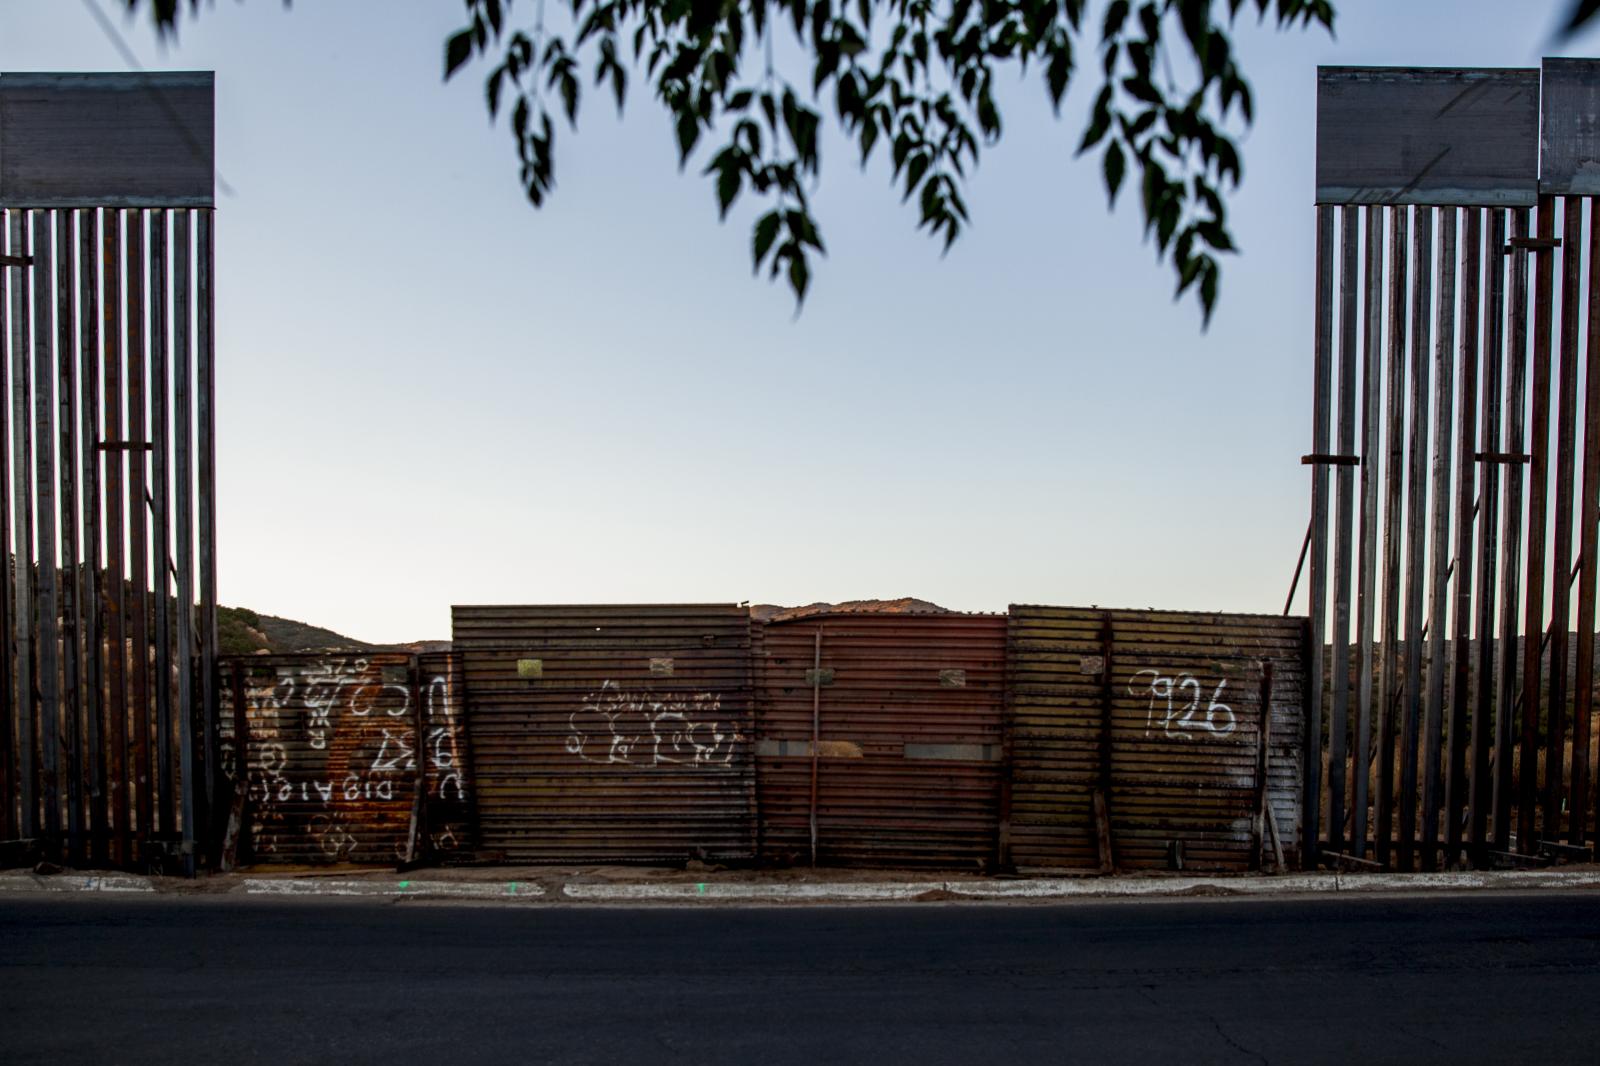 Image from Mexico - A view of the new and old border wall separating the...